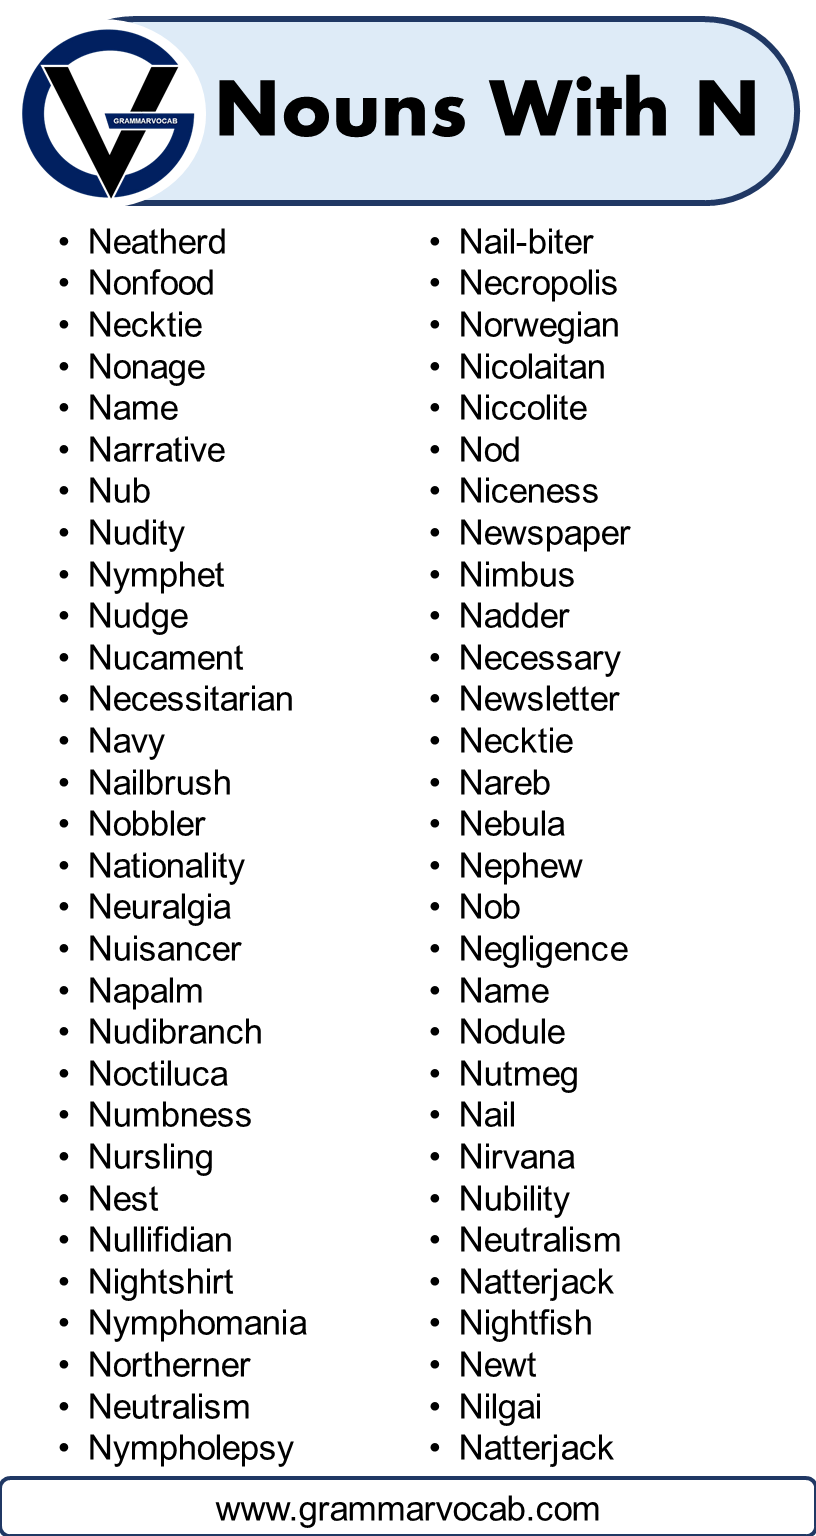 Nouns That Start With N